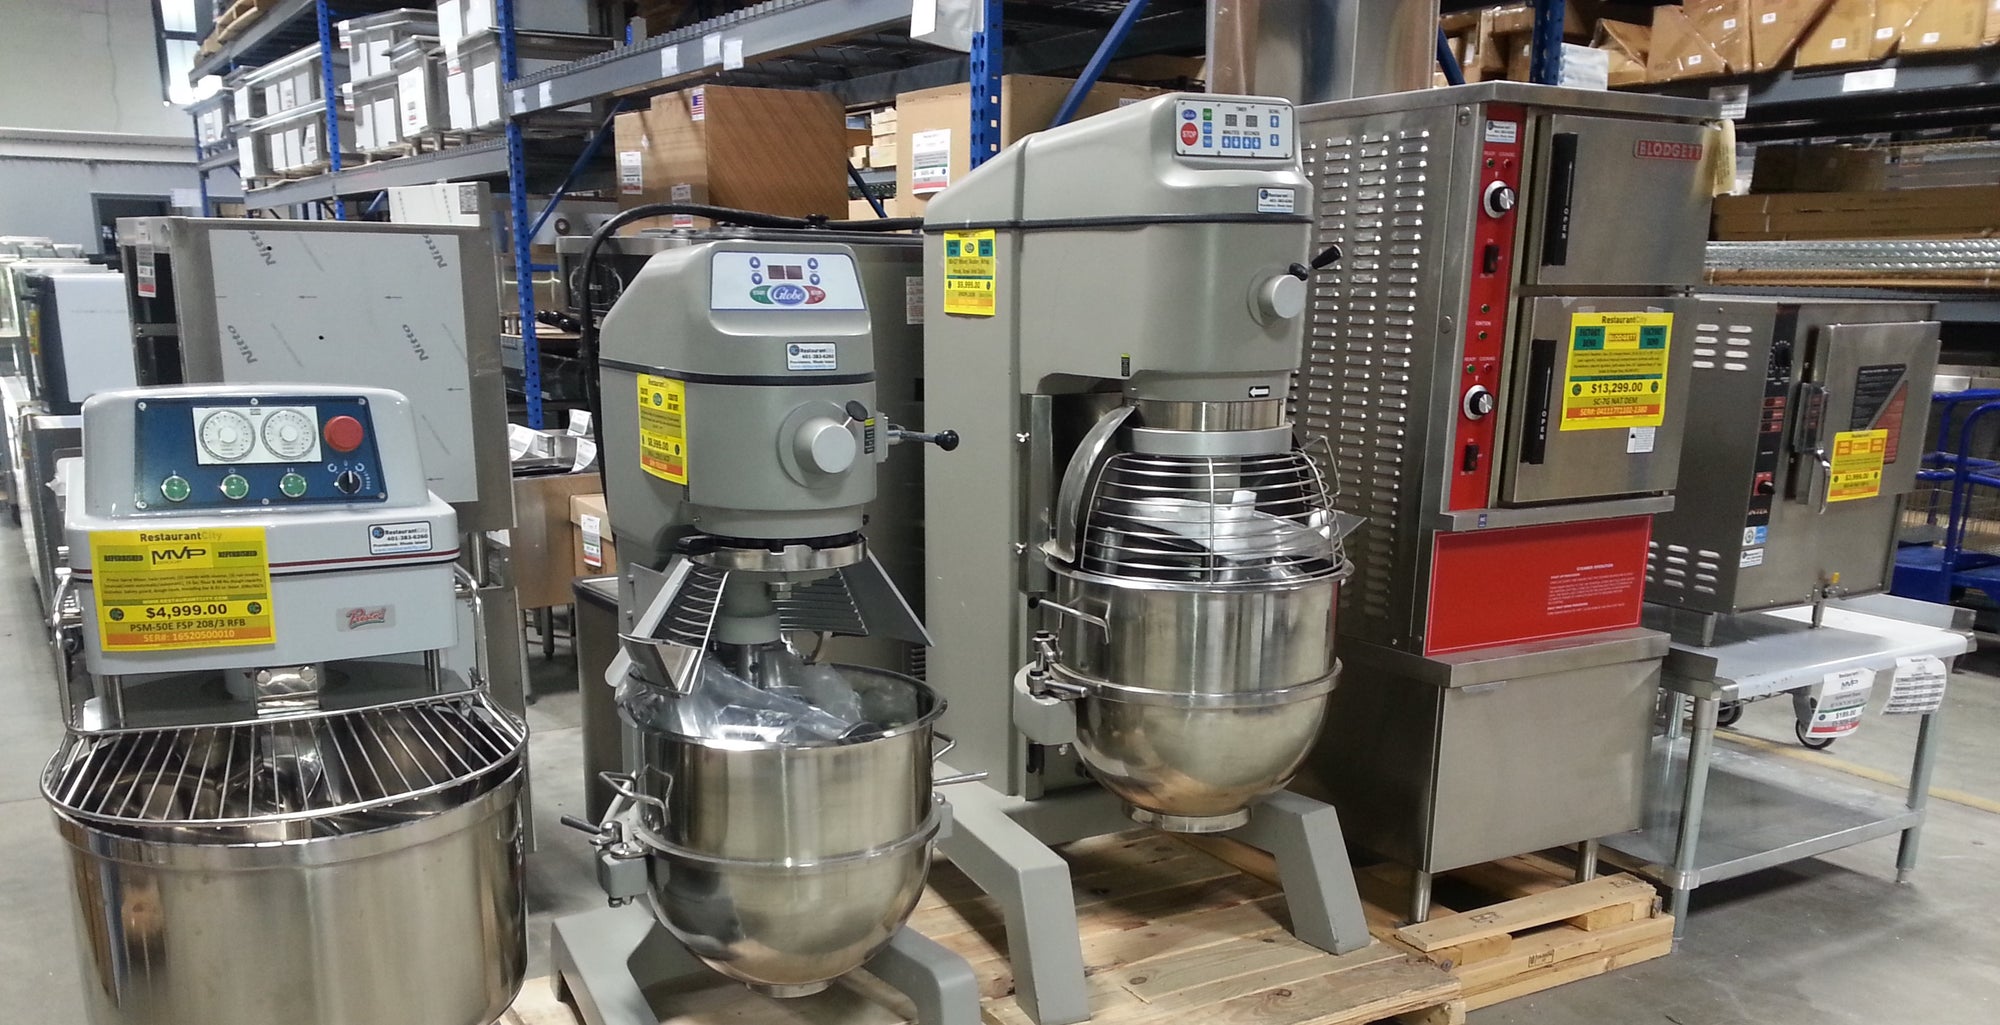 Commercial Mixers from Hobart, Doyon, Axis, Globe, and more!  All sizes and types available in stock!